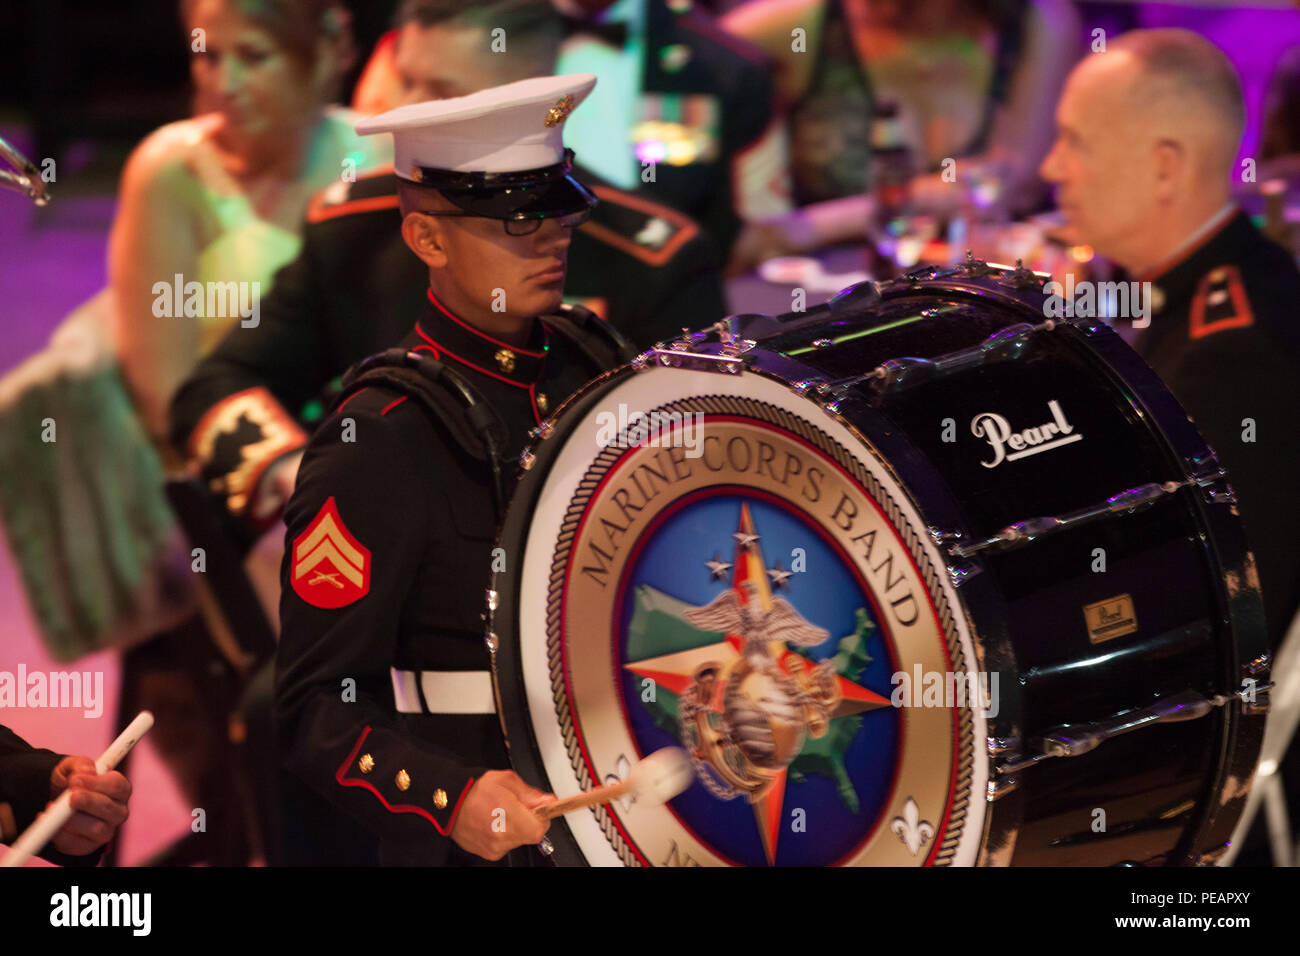 U.S. Marines Cpl. Estuarto Espinosa, Percussionist, with Marine Corps Band New Orleans performs for the celebration of the 240th Marine Corps Birthday Ball at Mardi Gras World, New Orleans, La., Nov. 21, 2015. This year’s celebration honors those past, present, and future Marines throughout history and marks the 240th Marine Corps Birthday since its founding on Nov. 10, 1775. (U.S. Marine Corps photo by Kimberly Aguirre/Released) Stock Photo